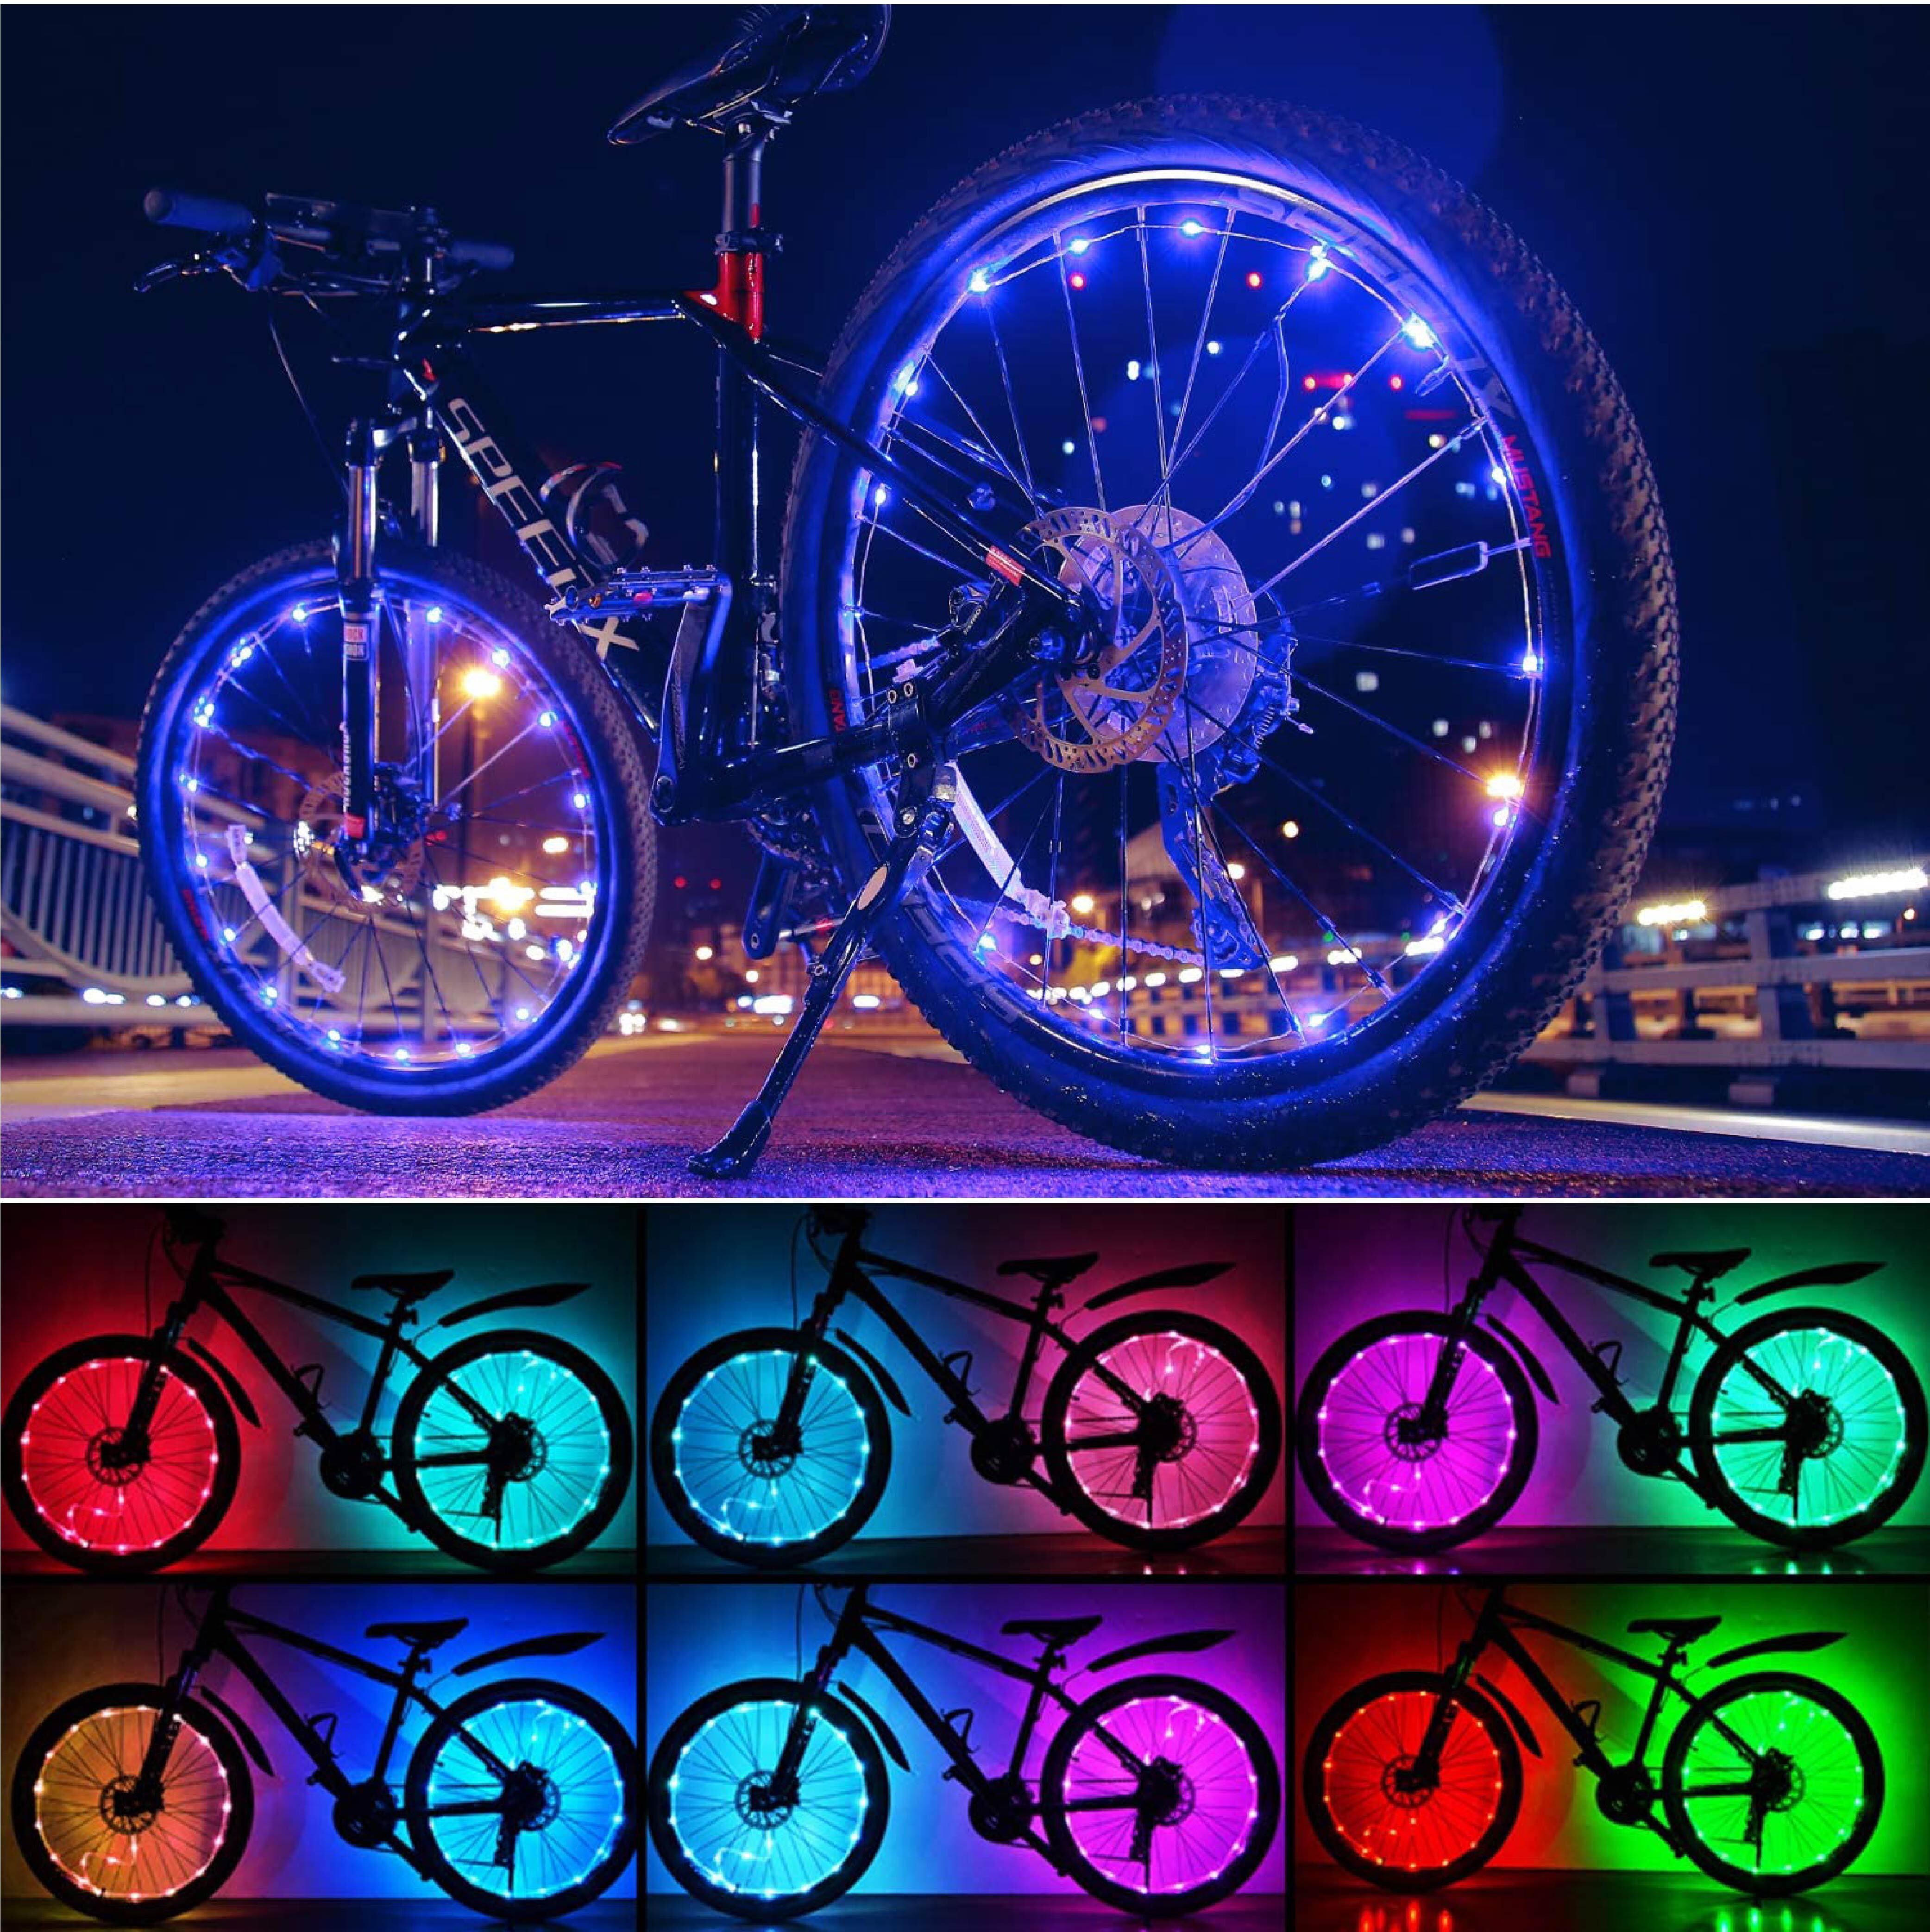 Kaitek LED Bicycle Wheel Accessory Light for 1 Wheel, Color-Changing - image 4 of 7